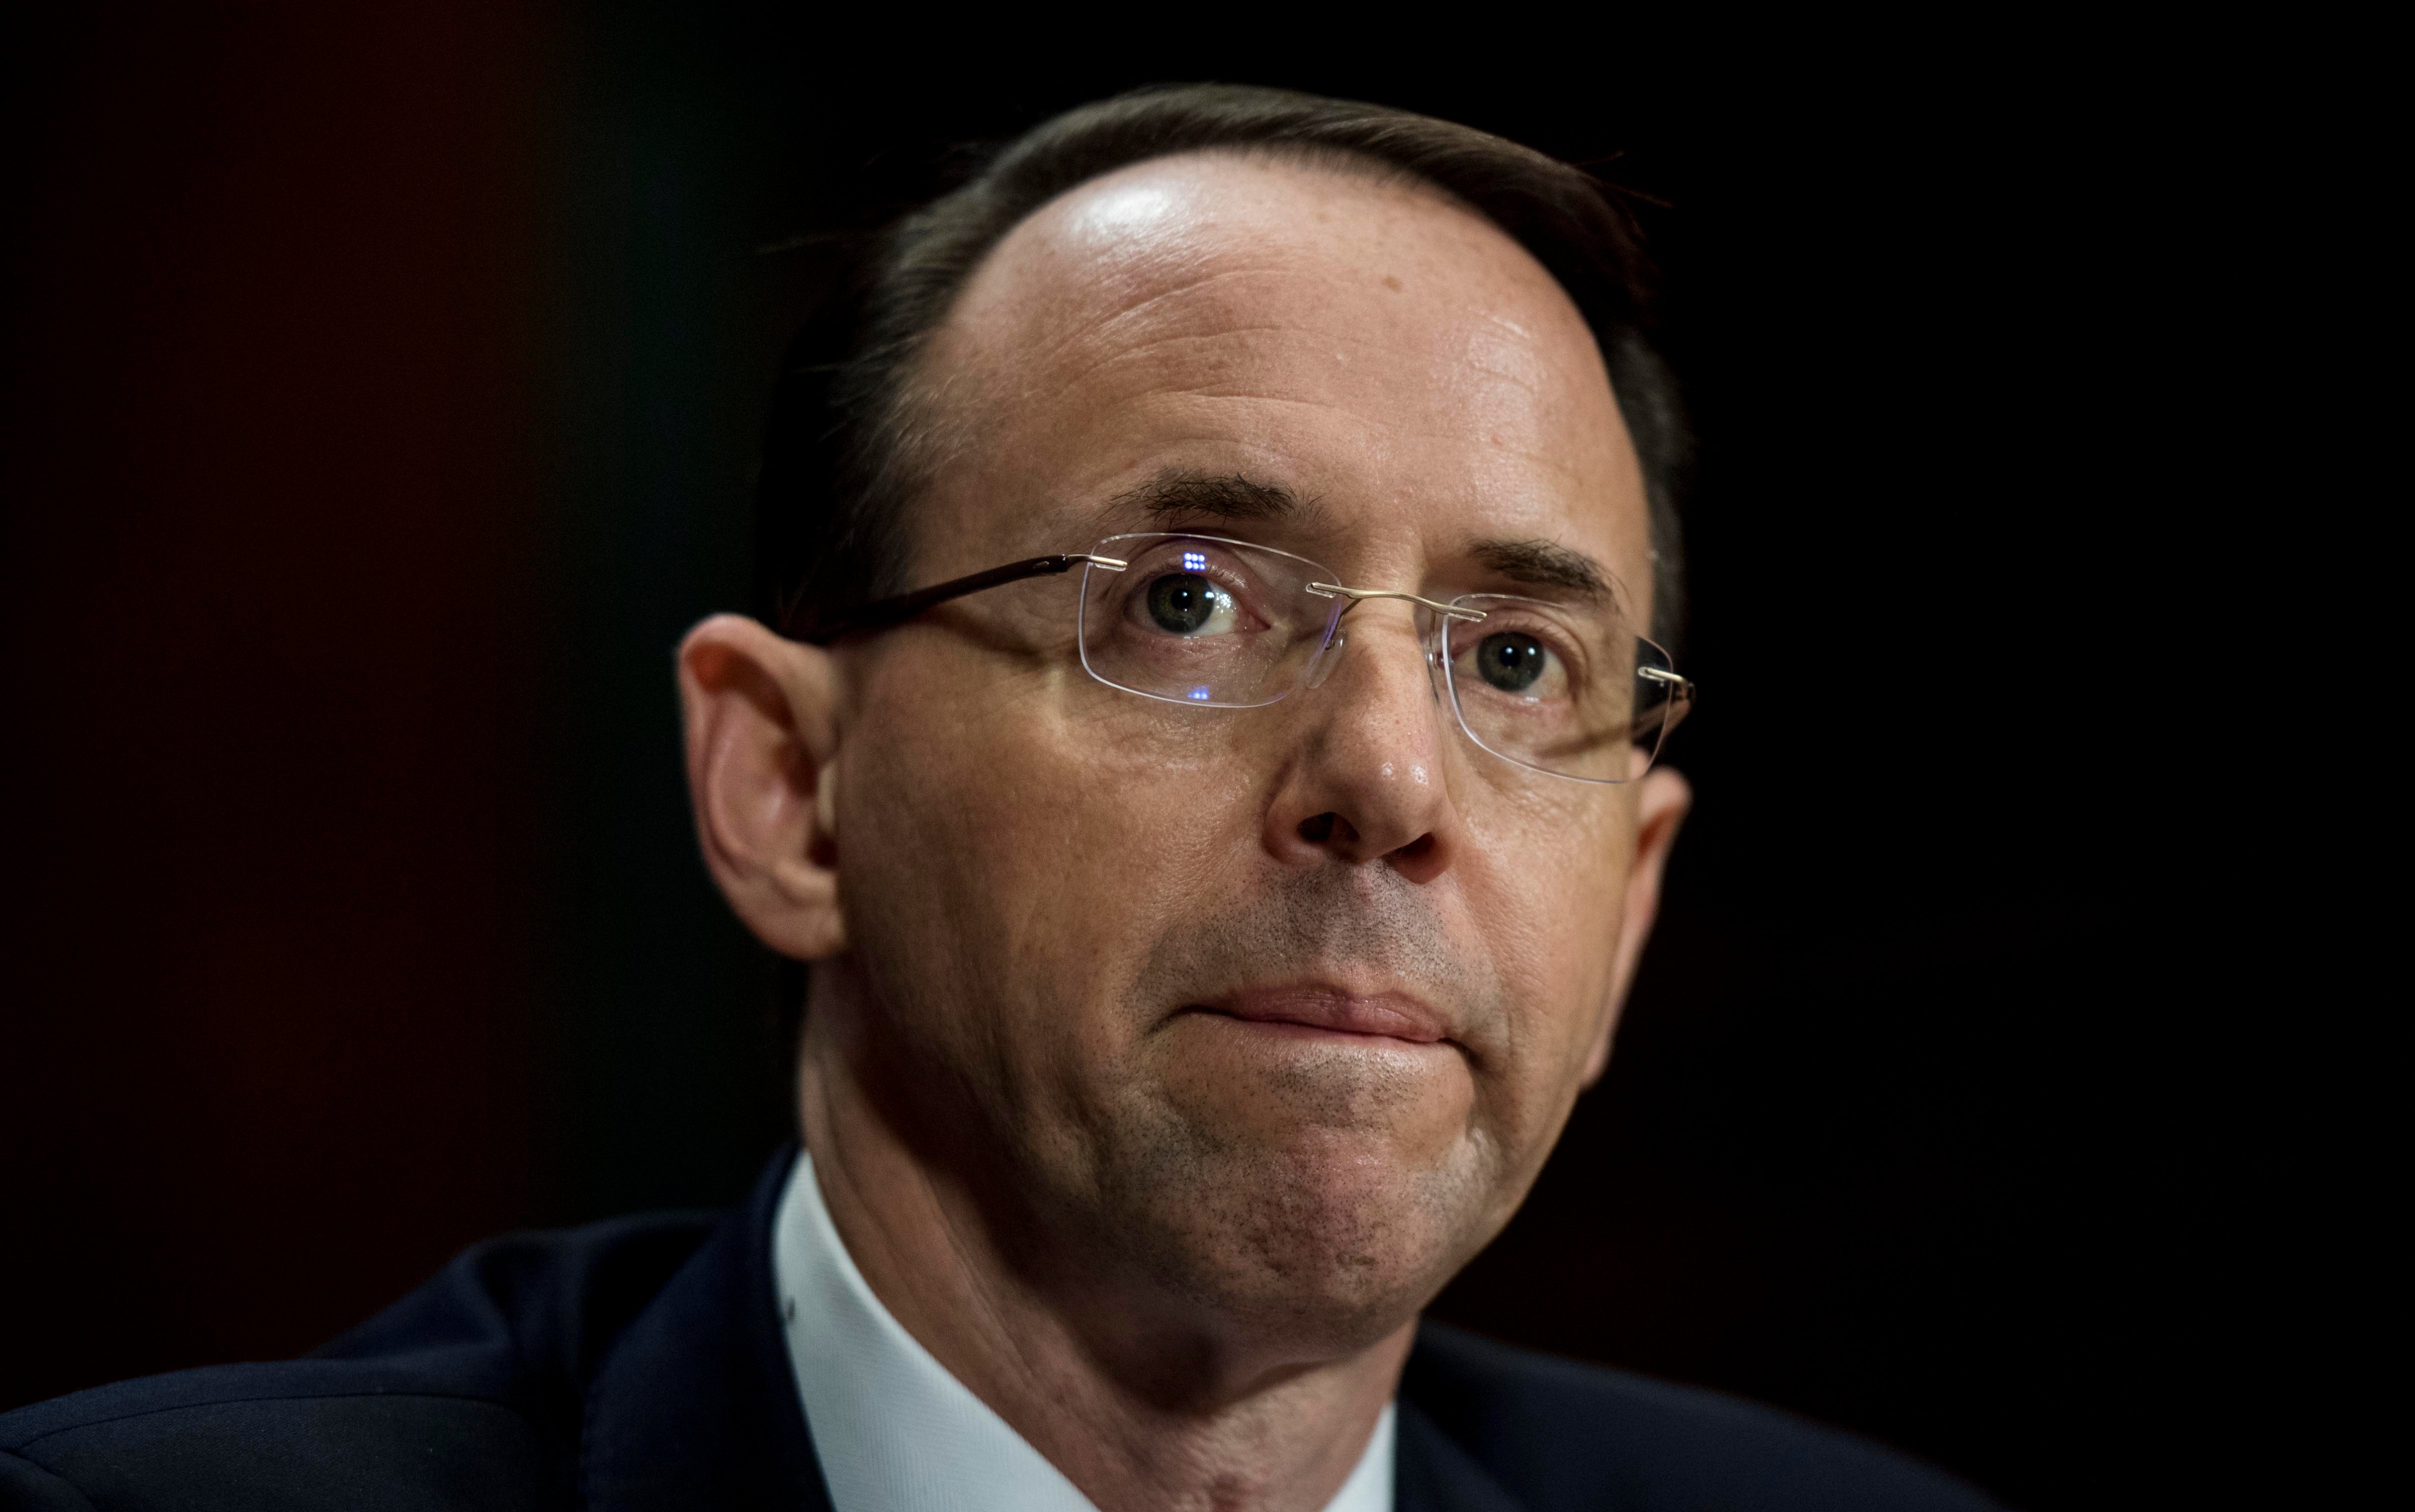 Nominees for Deputy Attorney General, Rod Rosenstein,  and Rachel Brand nominated for Associate Attorney General